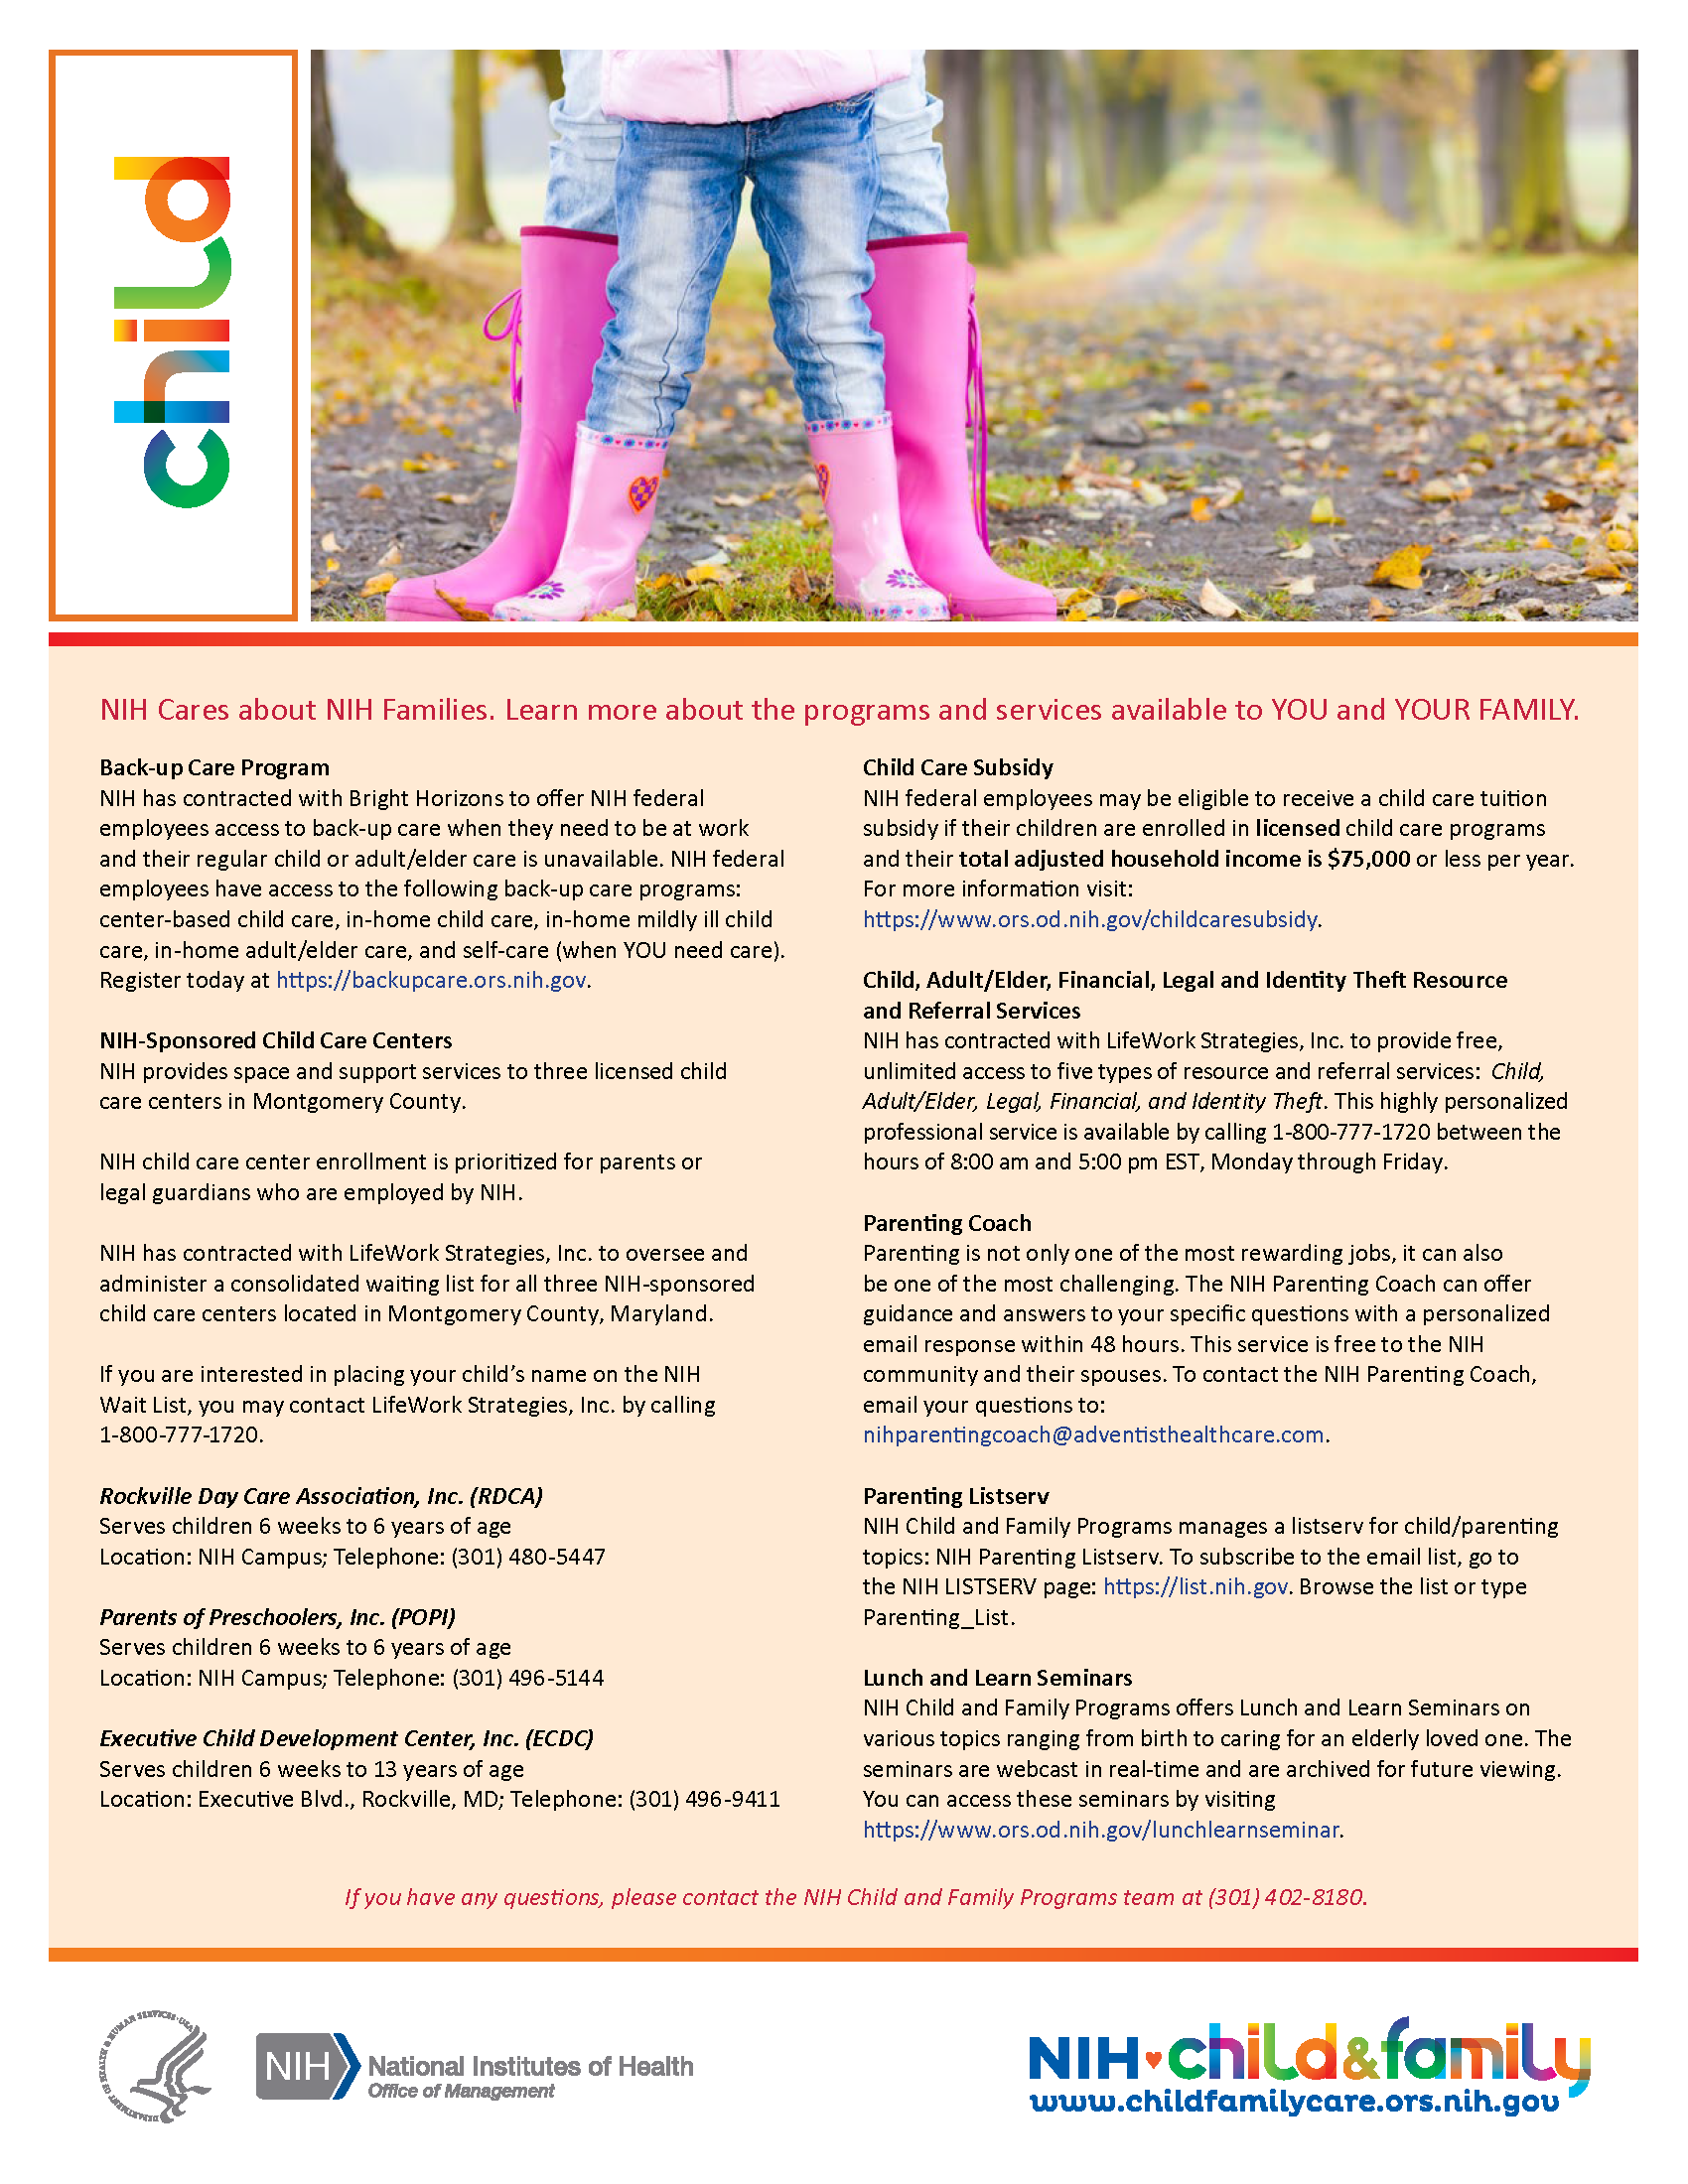 Child Programs and Services Flyer